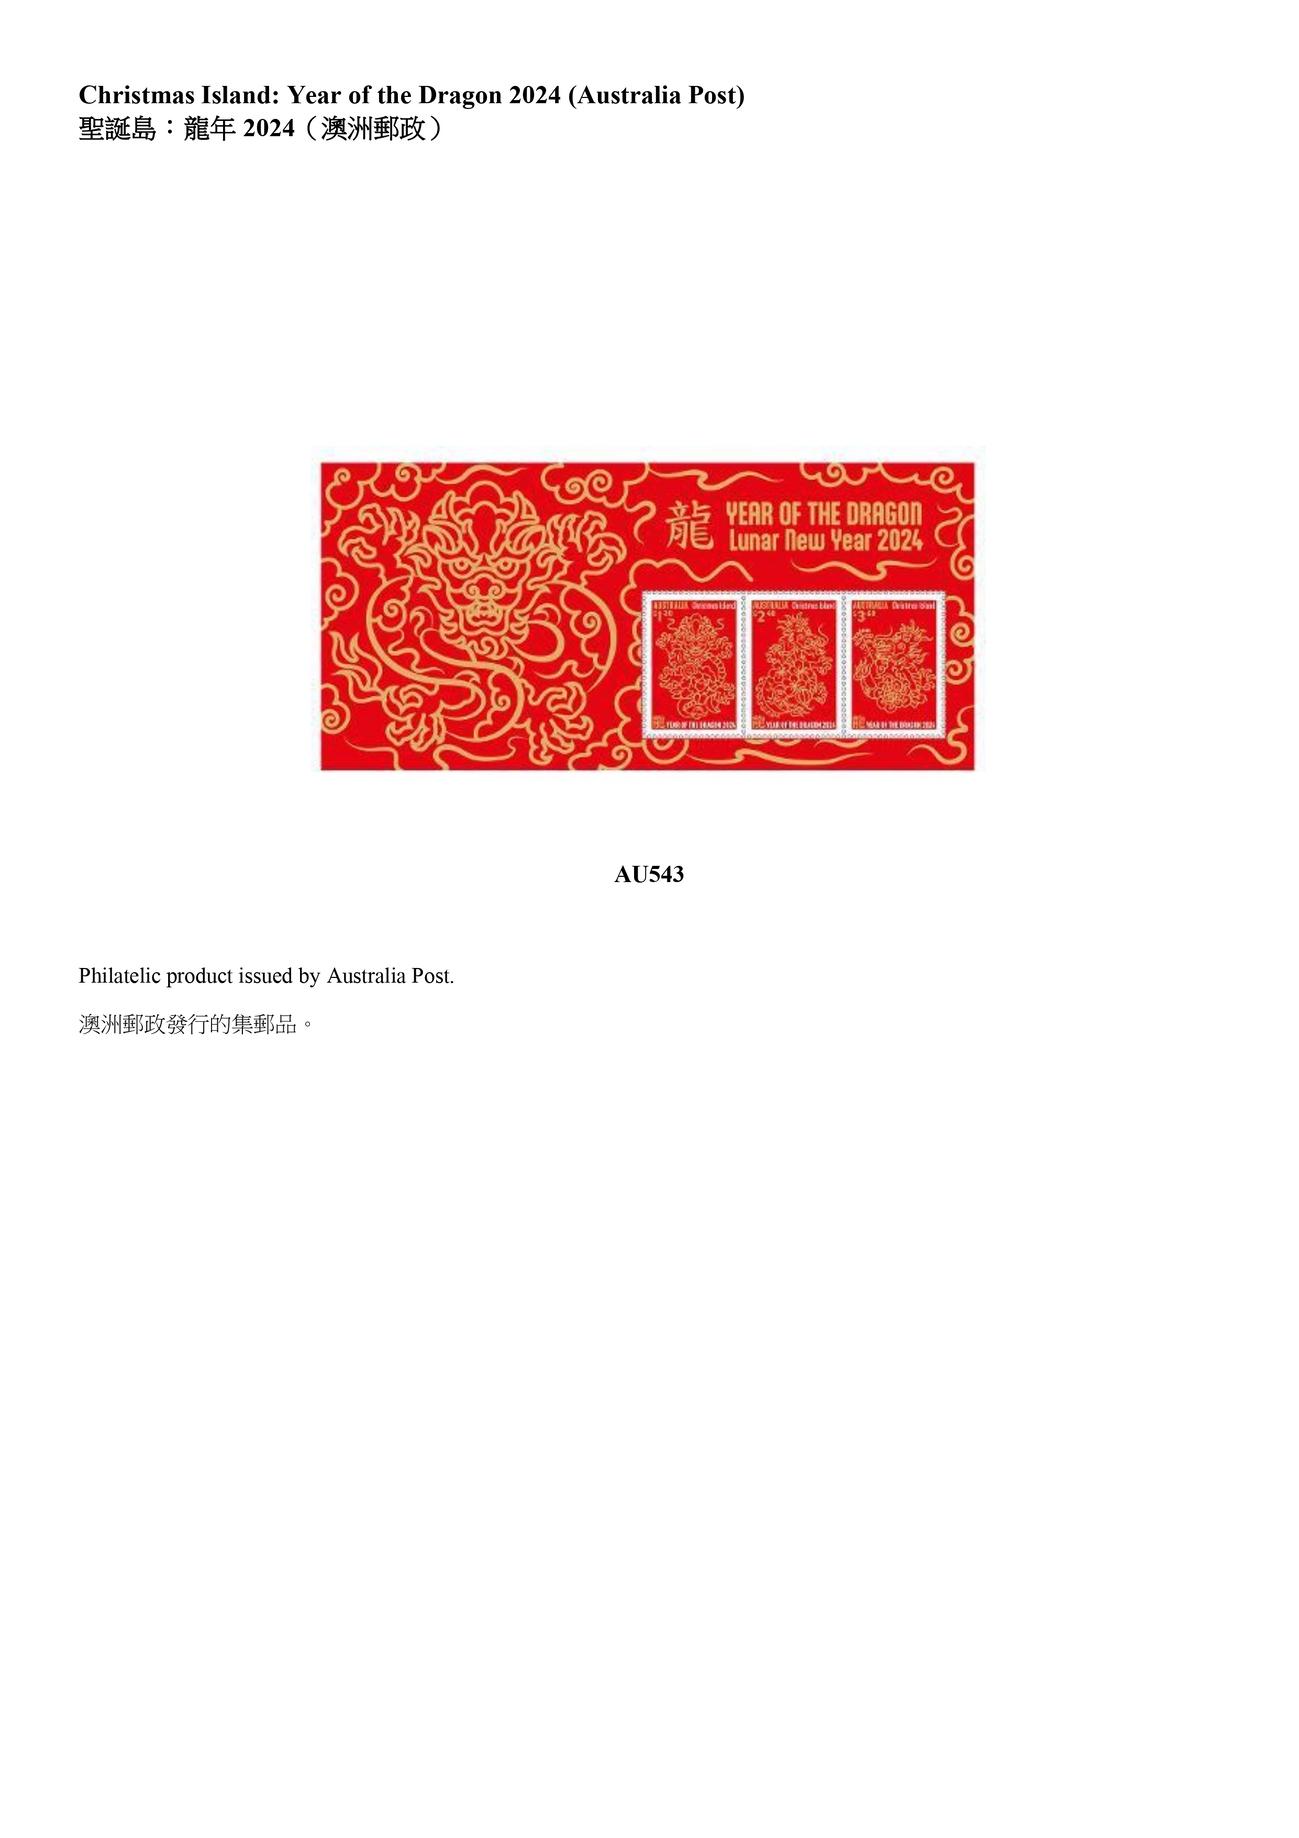 Hongkong Post announced today (April 29) that selected philatelic products issued by China Post, Macao Post and Telecommunications and the postal administrations of Australia, Isle of Man, Liechtenstein, New Zealand and the United Nations will be available for sale from tomorrow (April 30). Picture shows a philatelic product issued by Australia Post.